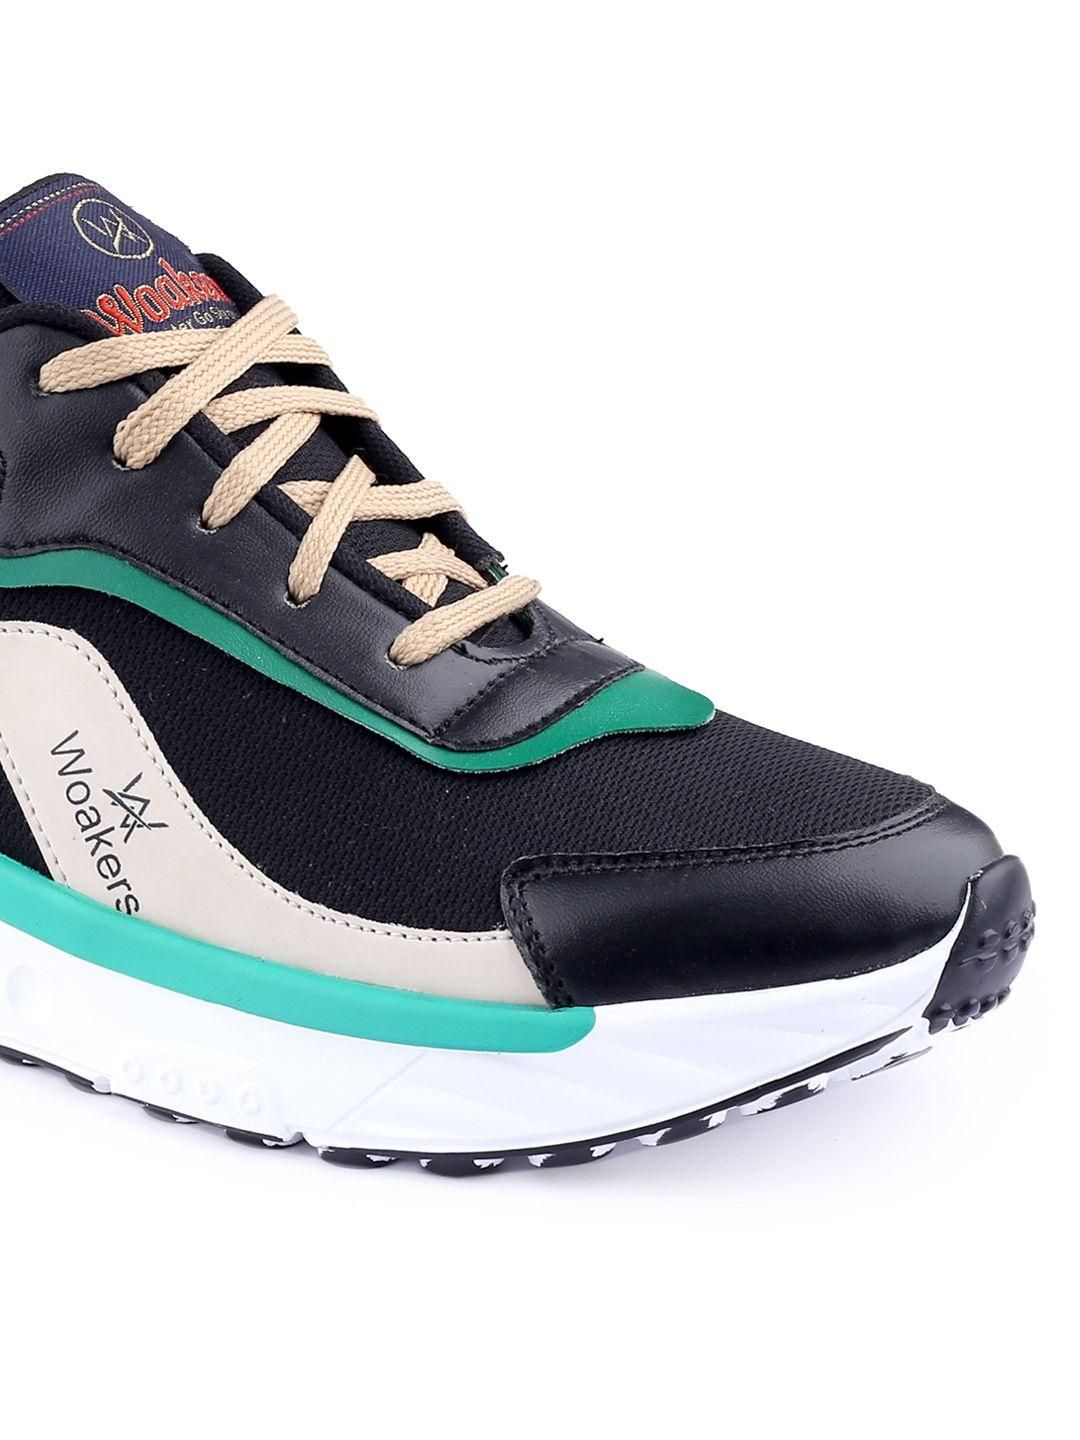 Groovy Men's Casual Sneakers Shoes by Woakers